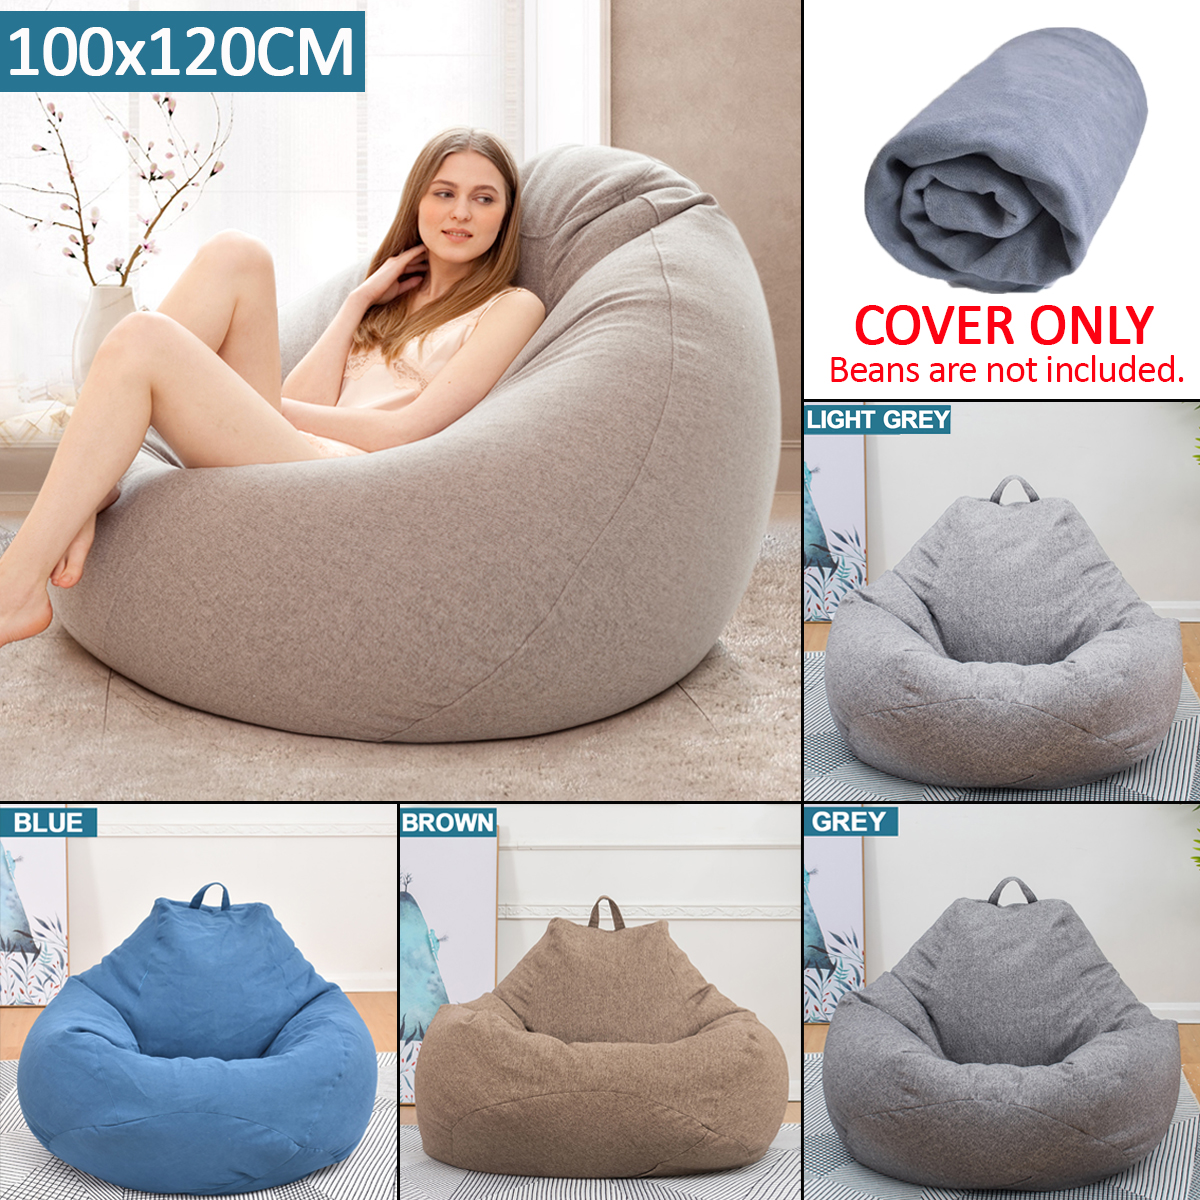 Extra Large Bean Bag Chair Lazy Sofa Cover Indoor Outdoor Game Seat BeanBag 1